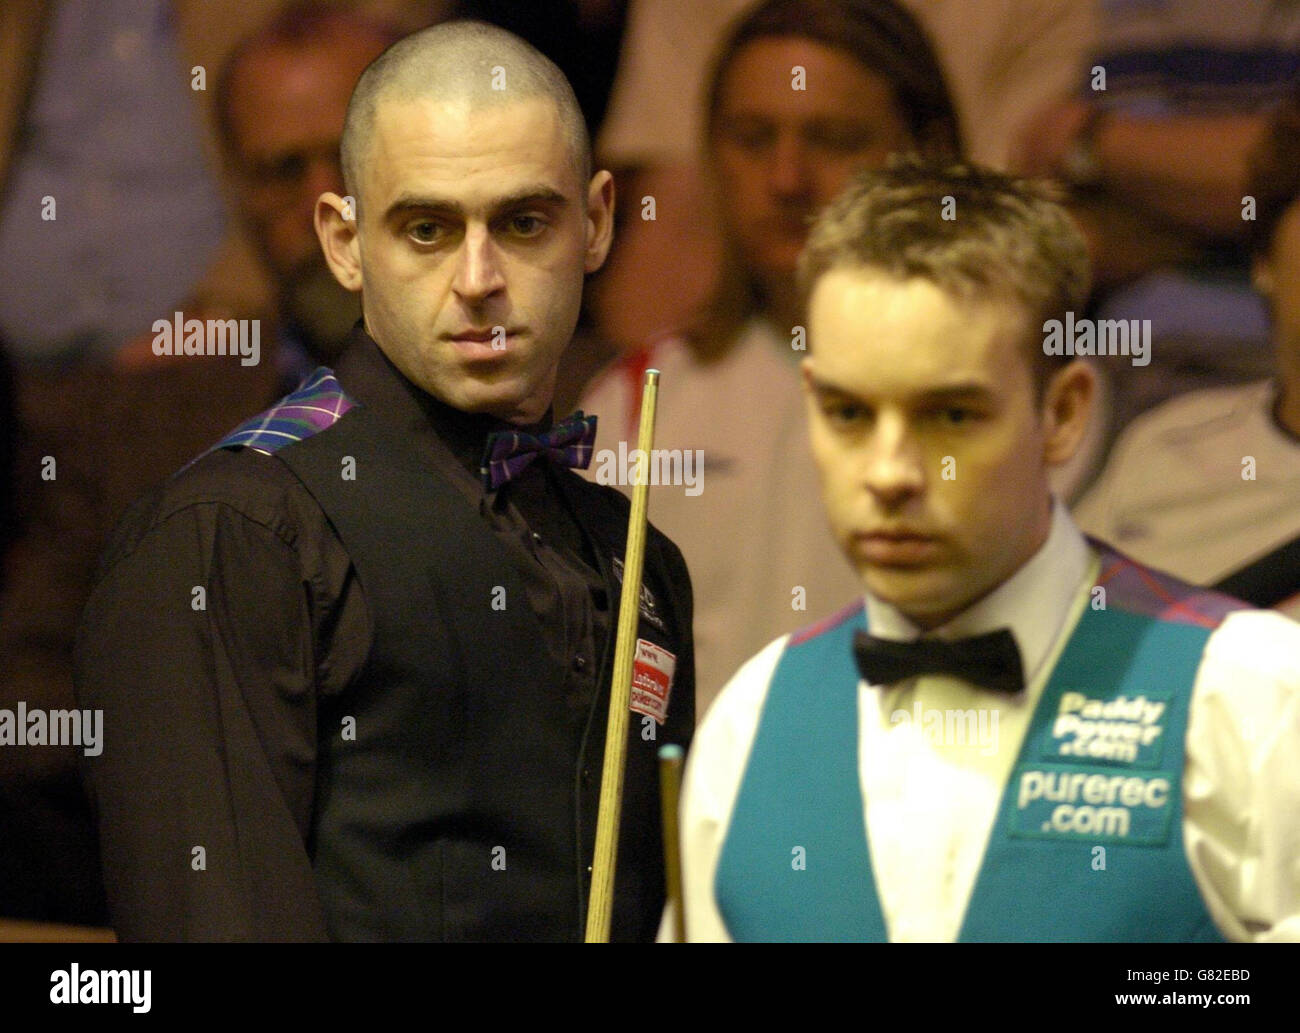 Snooker - Embassy World Championship 2005 - second tour - Ronnie O'Sullivan / Allister carter - le Crucible. Ronnie O'Sullivan (L) montres Allister carter. Banque D'Images